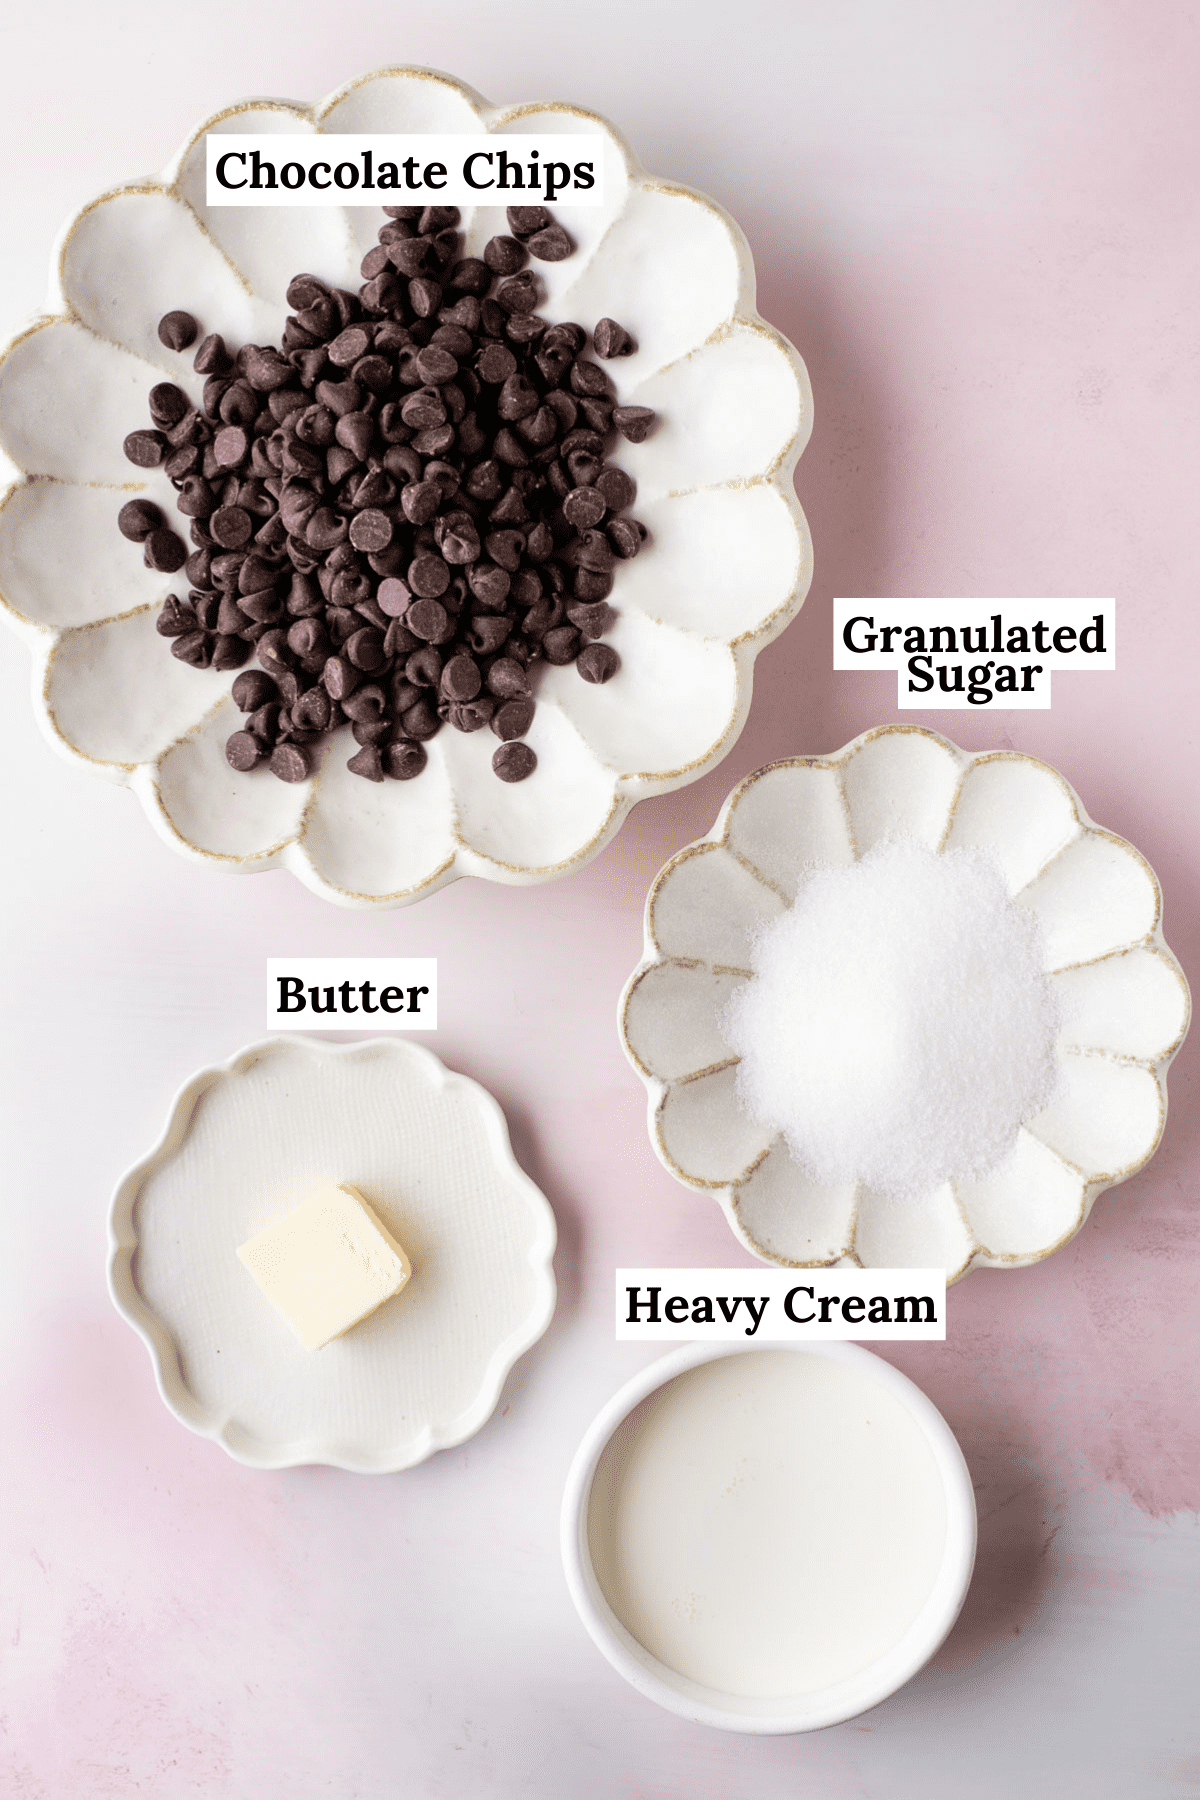 the ingredients for hot fudge sauce including heavy cream, granulated sugar, semi-sweet chocolate chips and butter